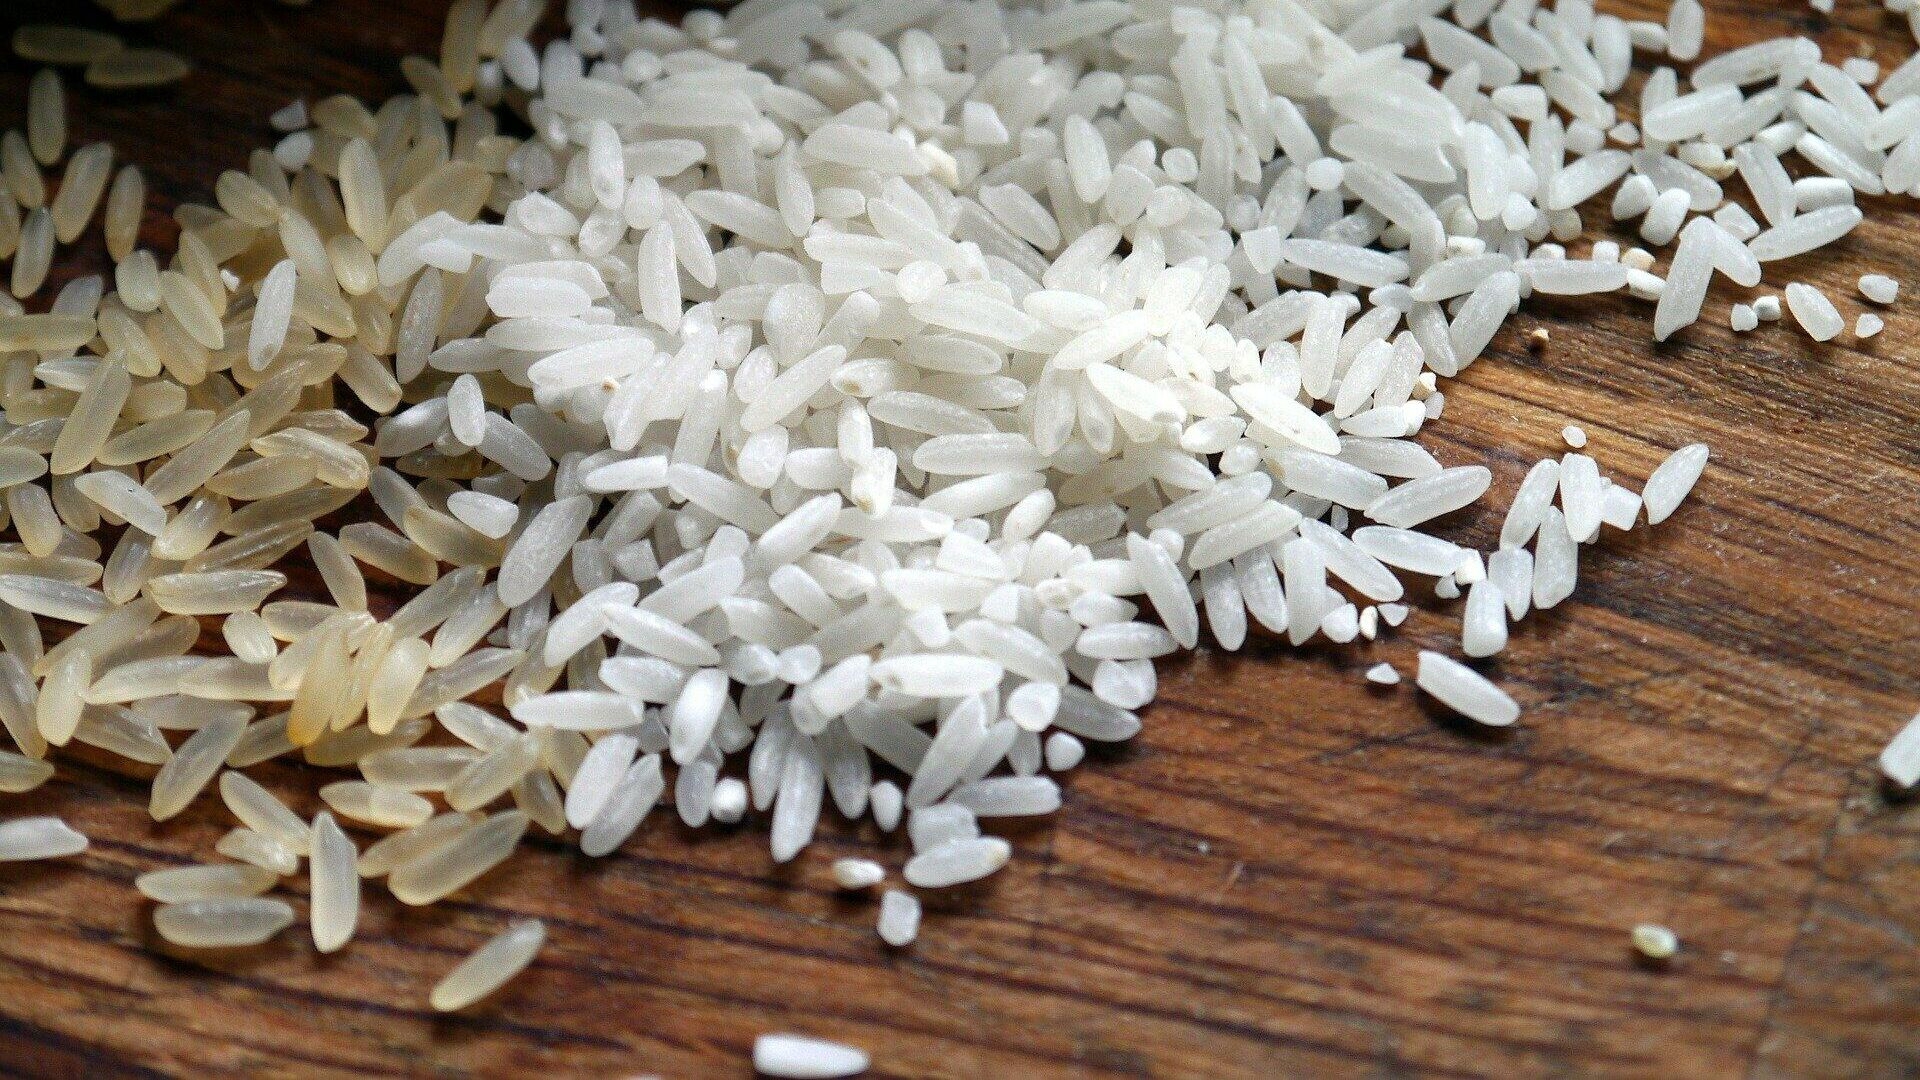 India has imposed a ban on rice exports